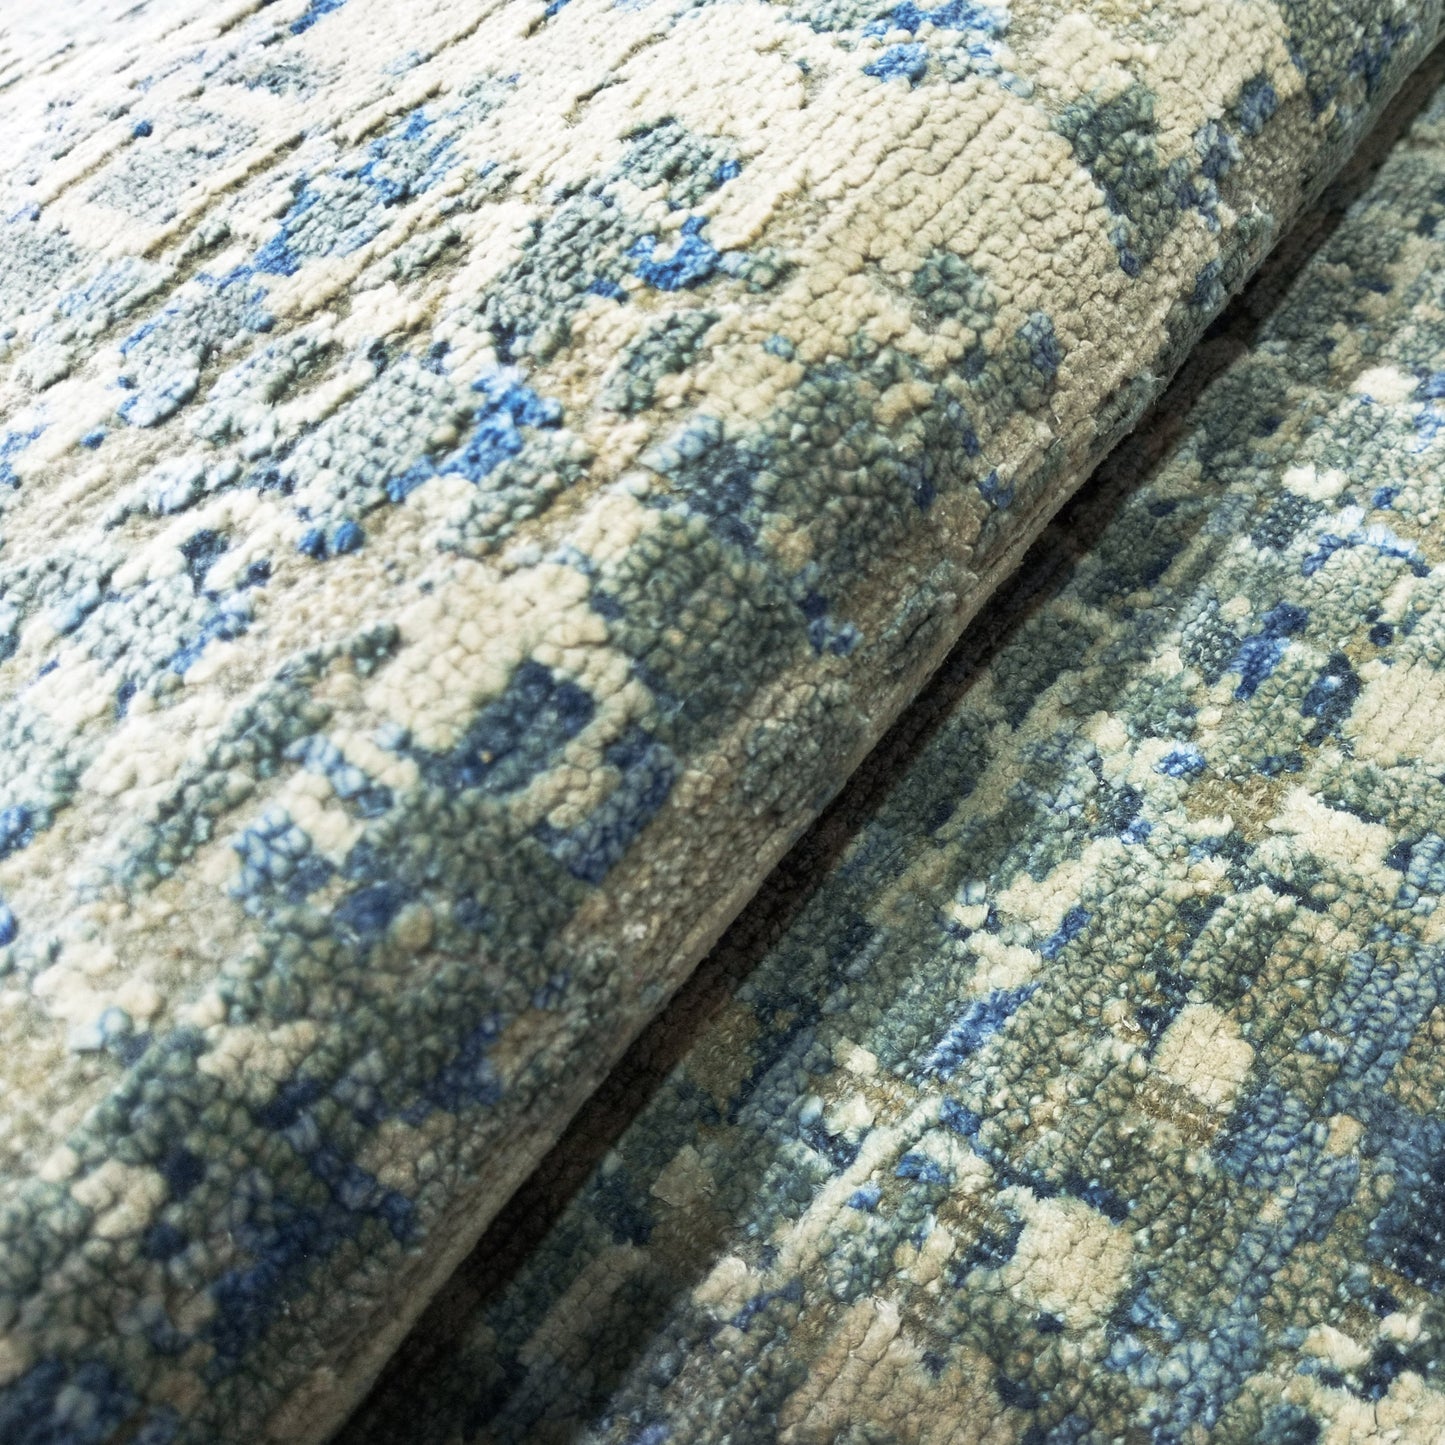 Get trendy with Grey, Ivory and Blue Silk and Wool Modern Textured Handknotted Runner Rug - Modern Rugs available at Jaipur Oriental Rugs. Grab yours for $3310.00 today!